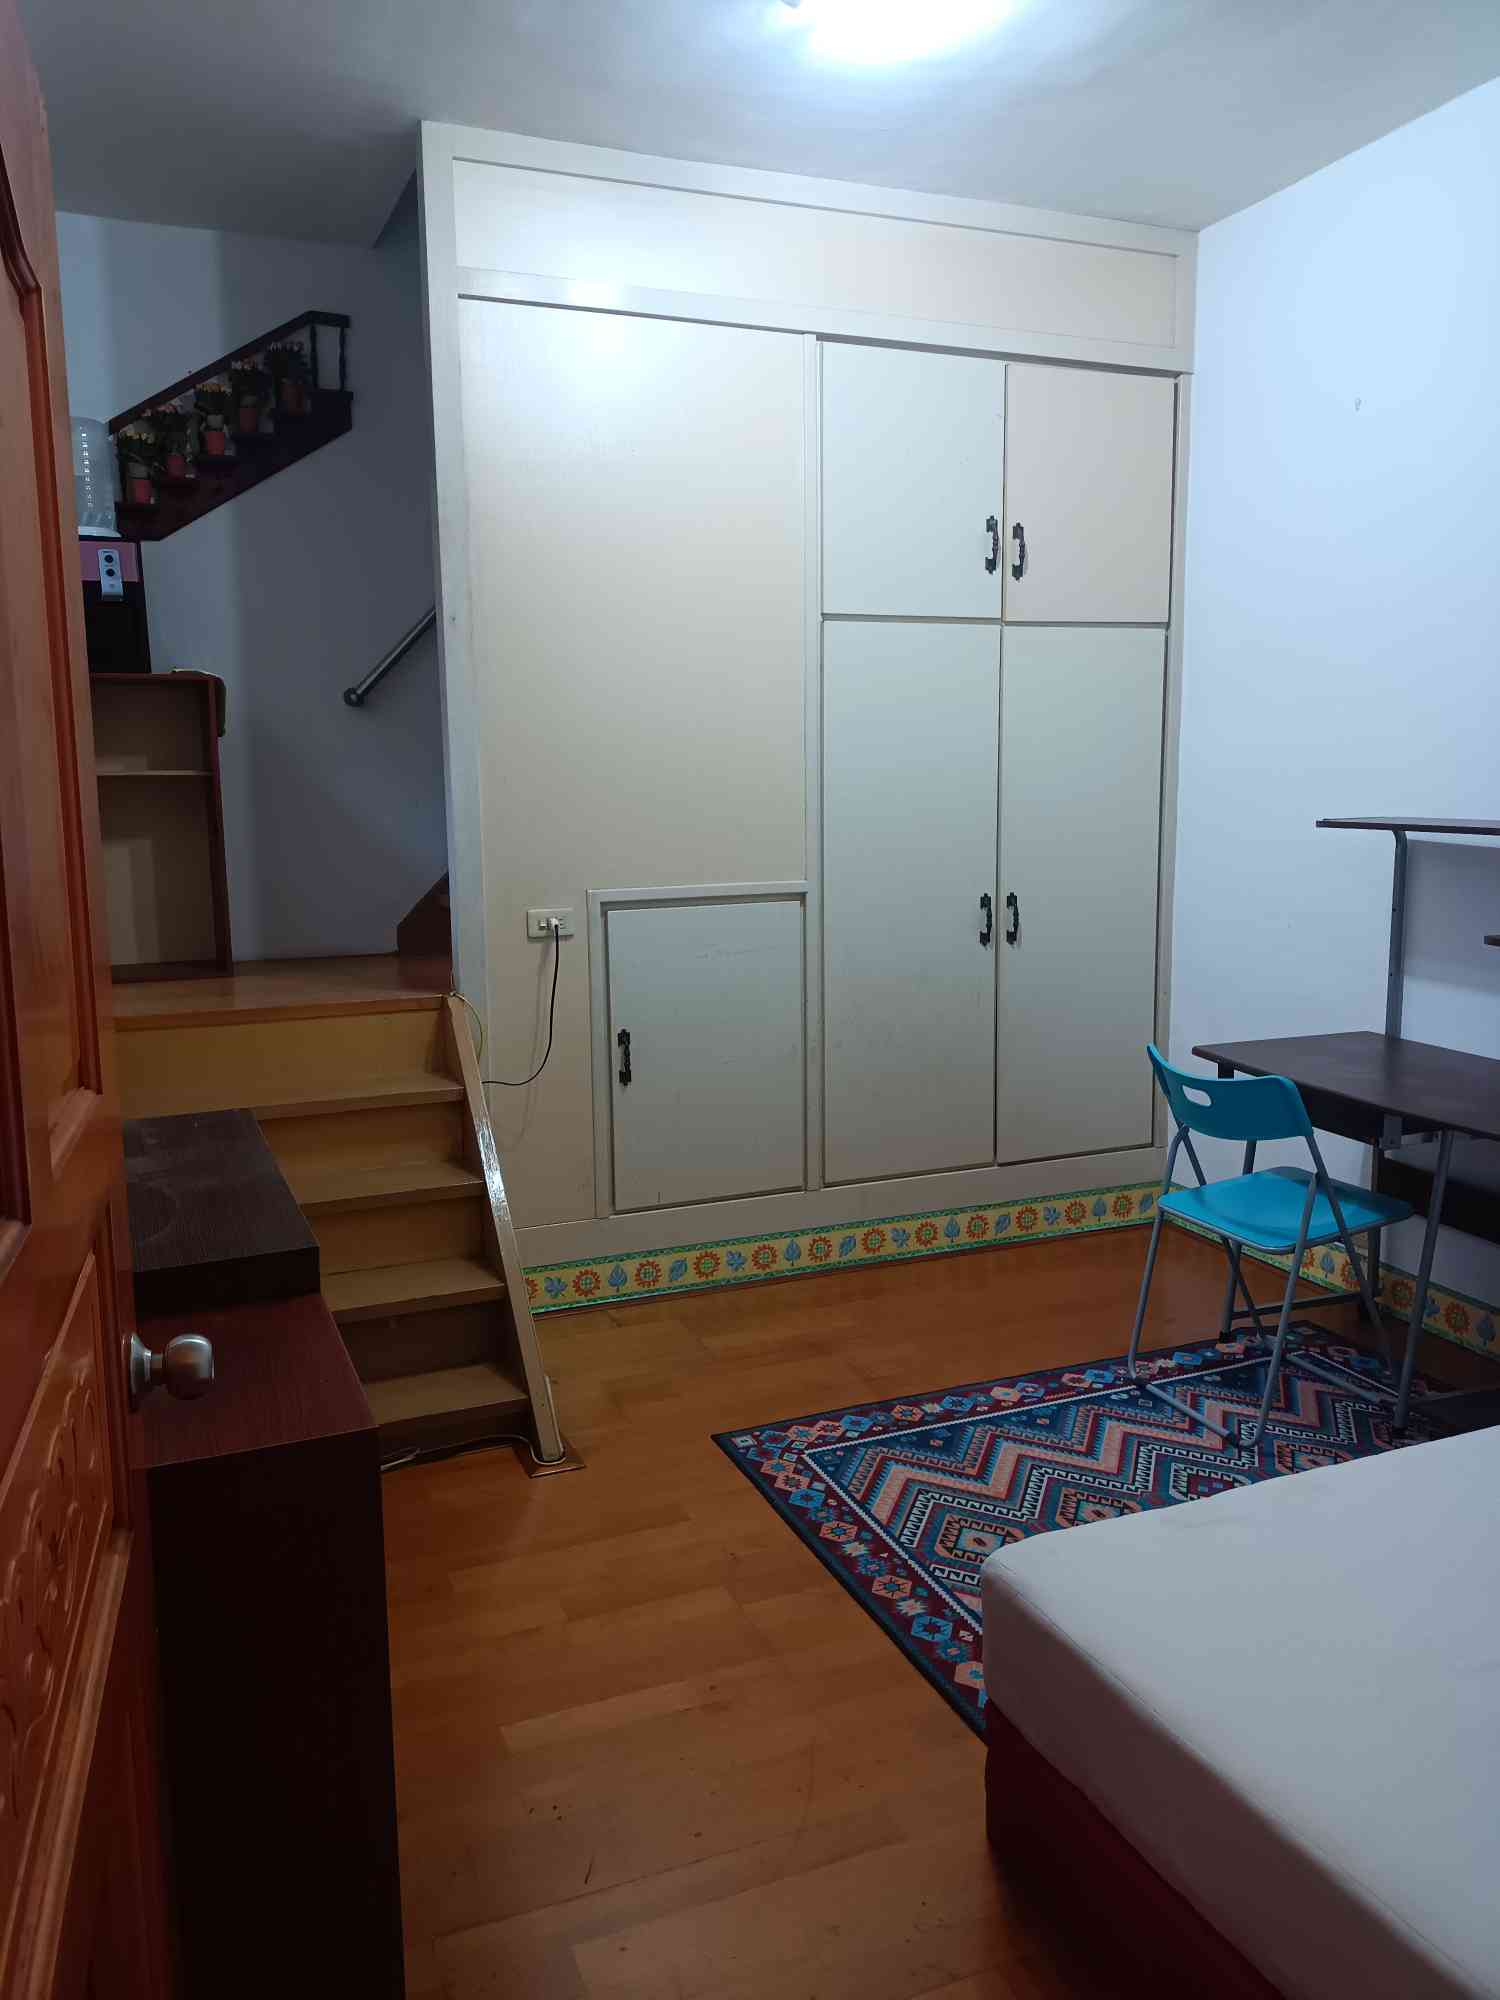 Teaching English and Living in Taiwan Apartments to Share, nice apartment share room for a good tenant image